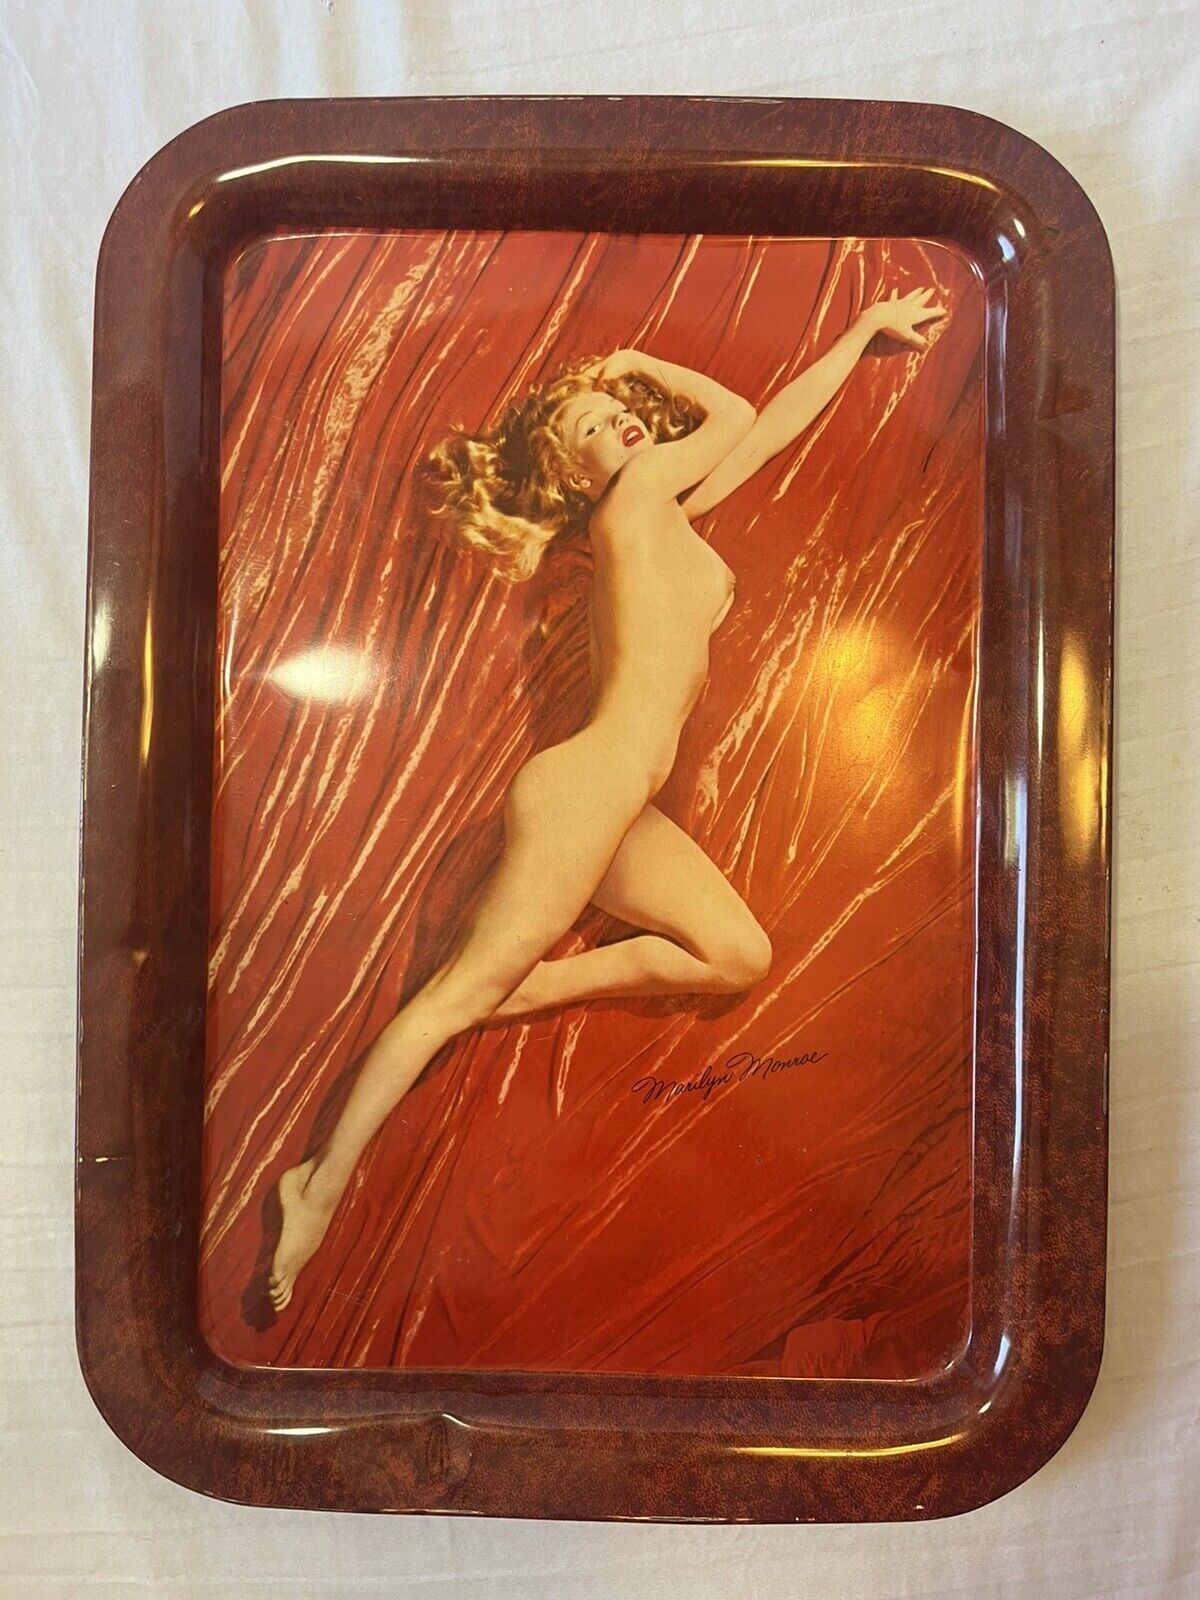 Marilyn Monroe Serving Tray. A New Wrinkle, Tom Kelly. Made in 1950s. 17x12